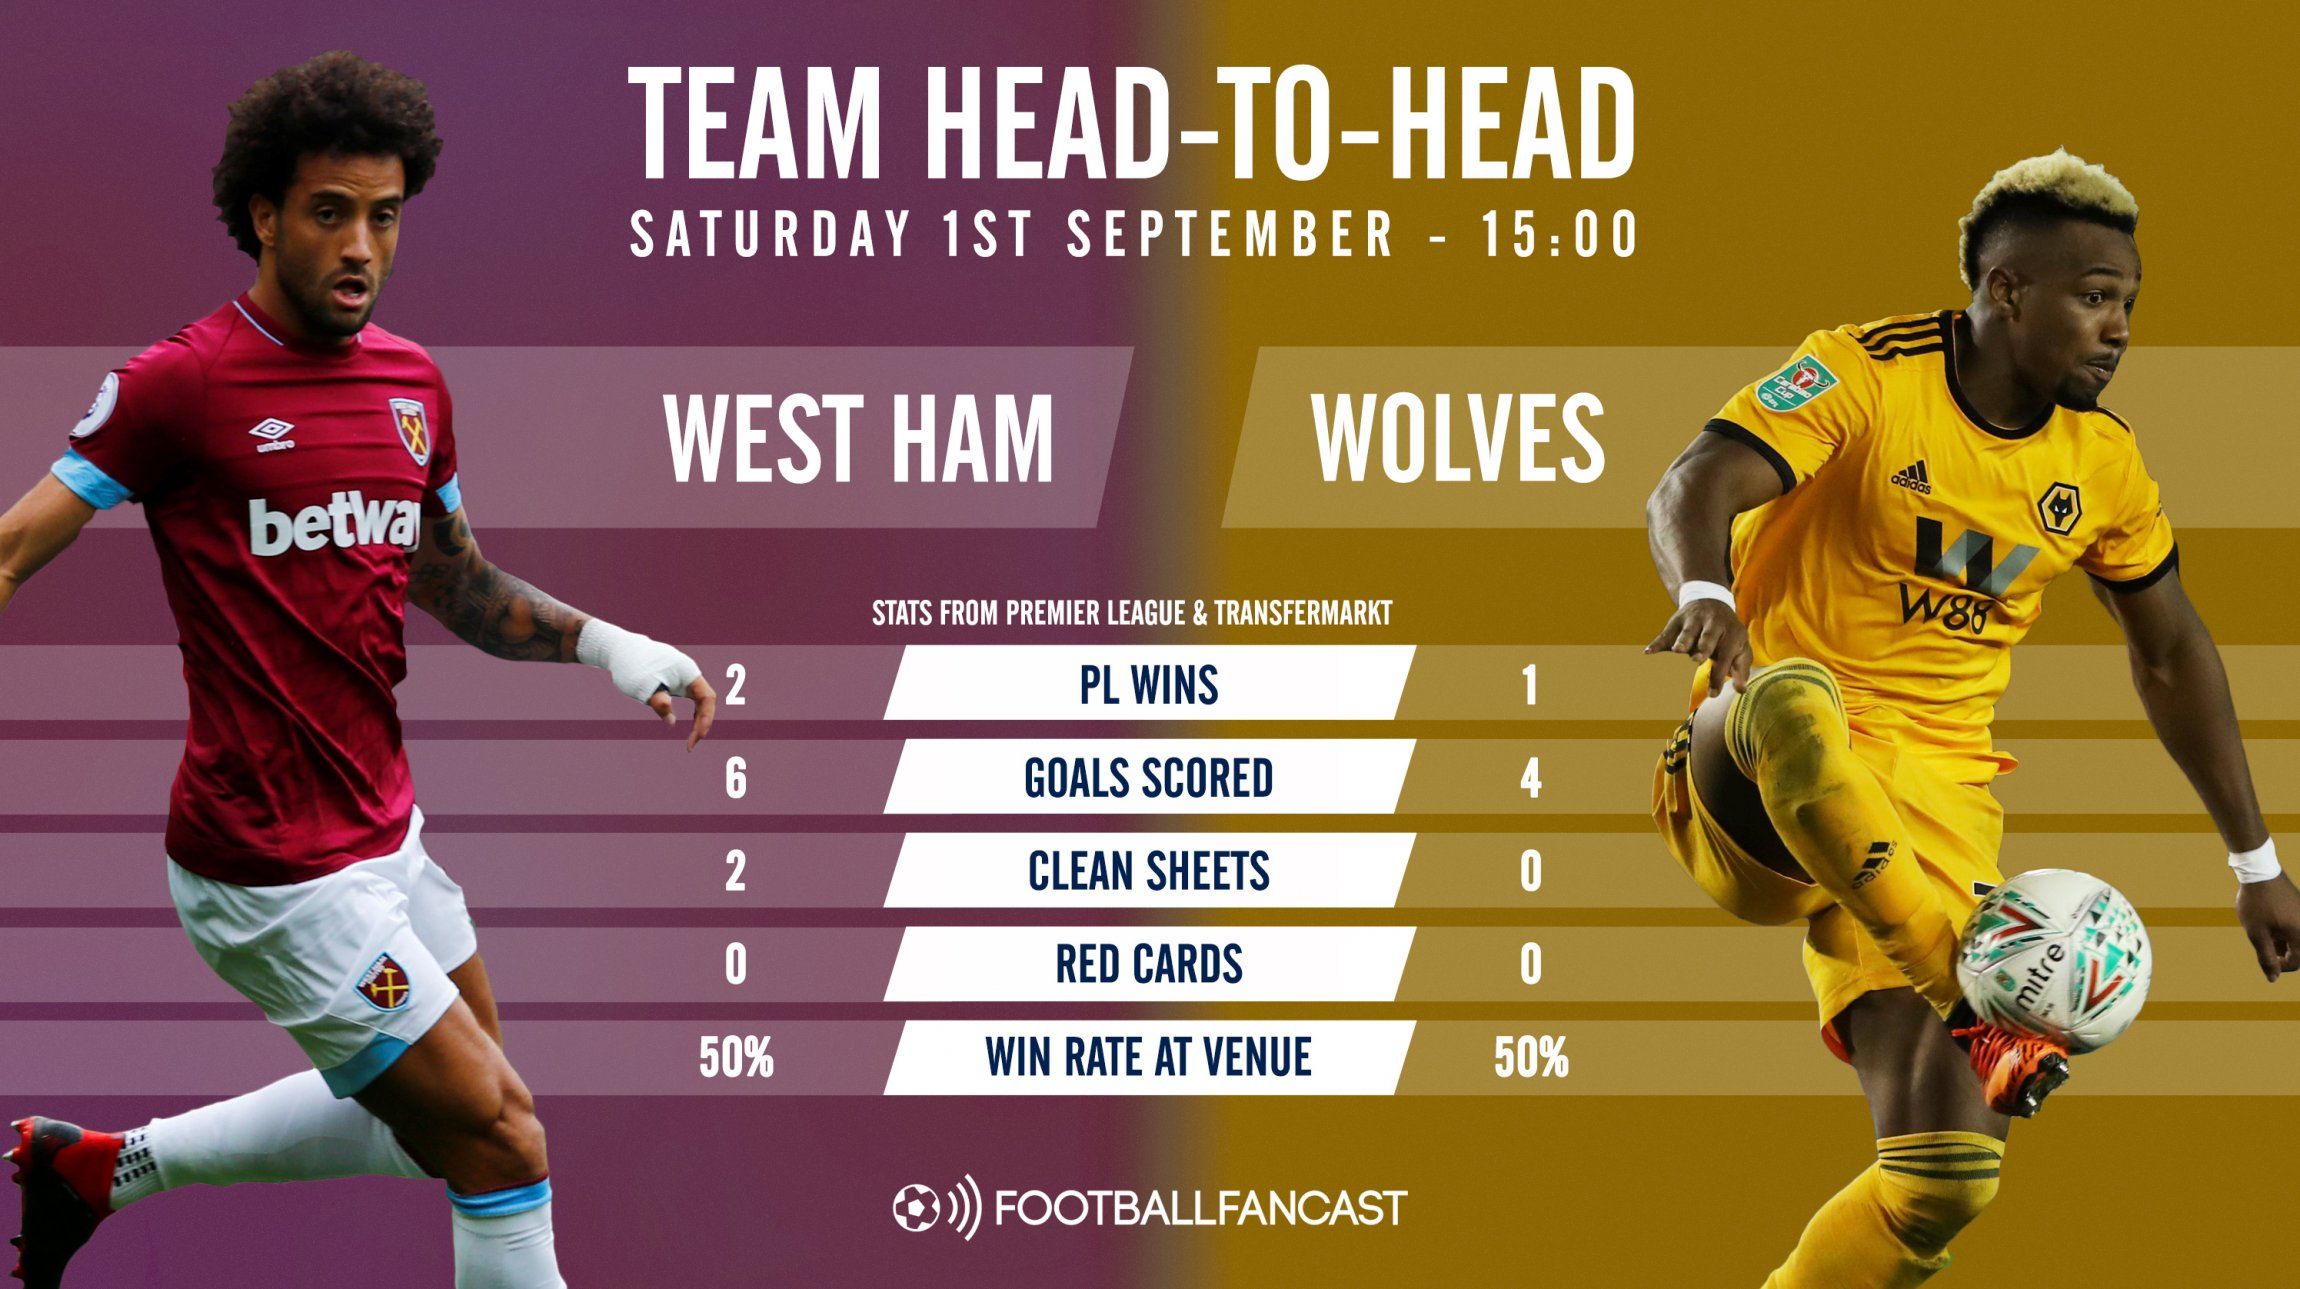 West Ham vs Wolves - Head to Head record